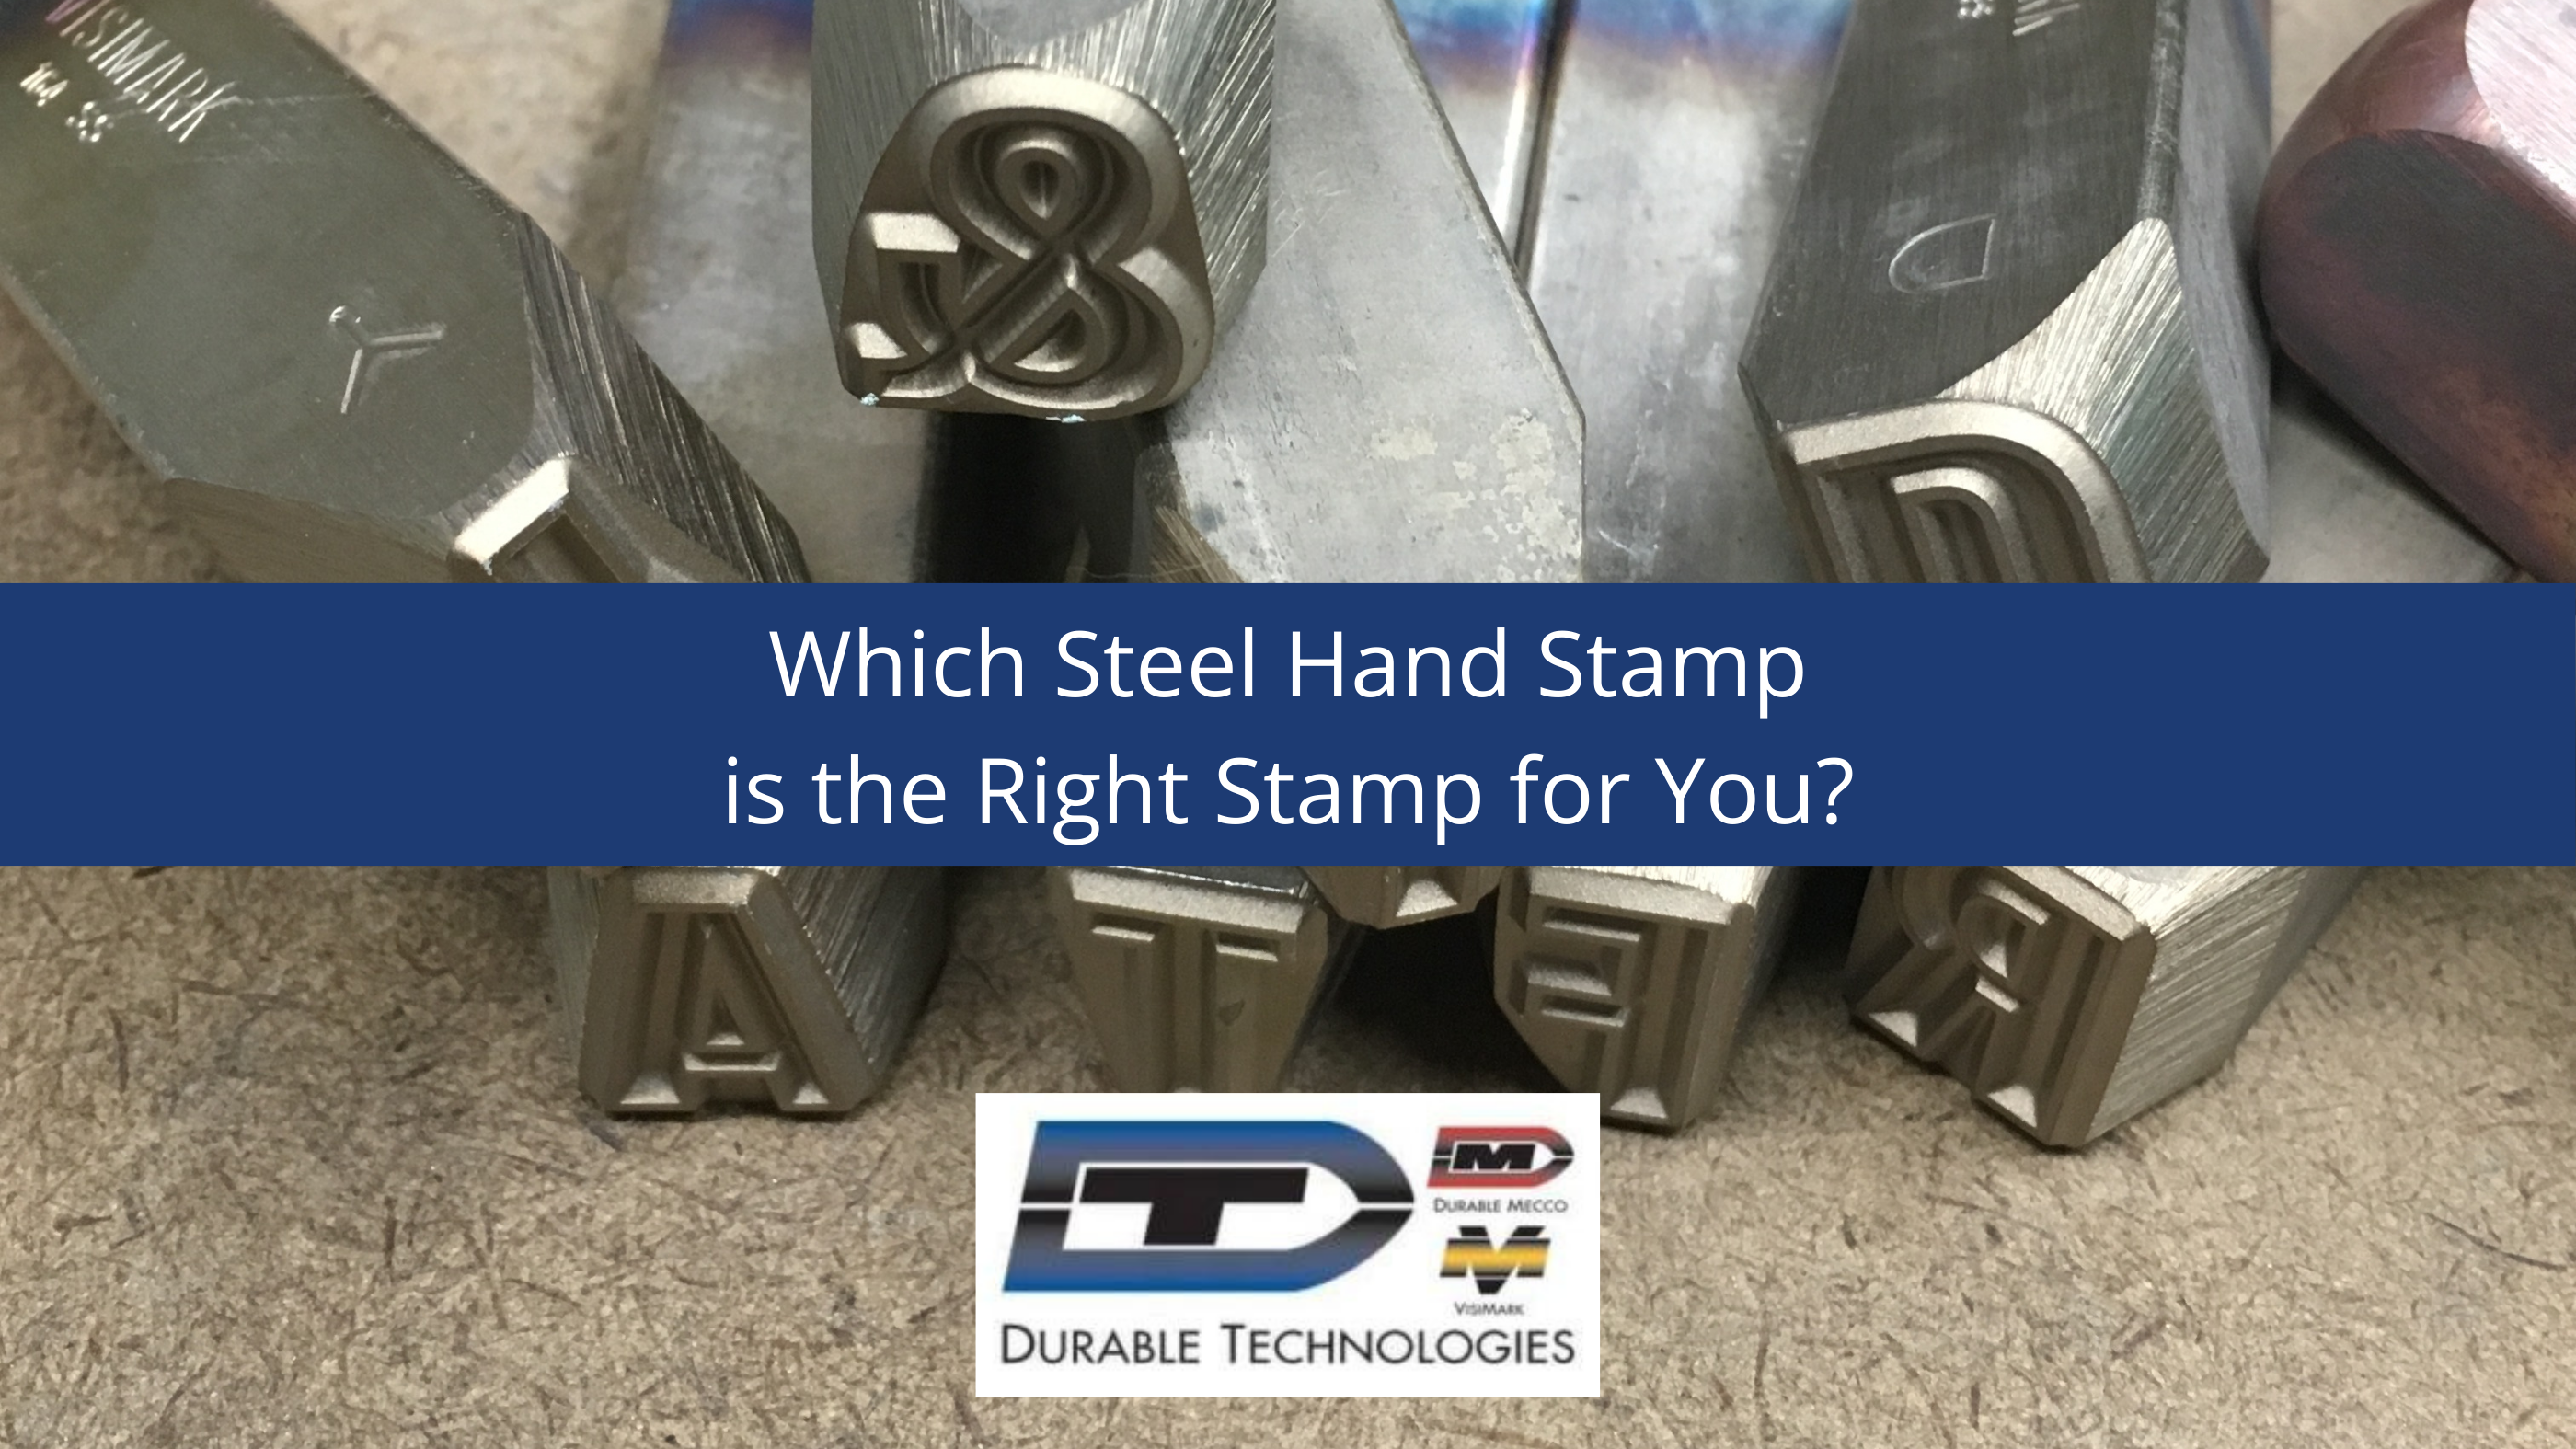 Which Steel Hand Stamp is the Right Stamp for You?